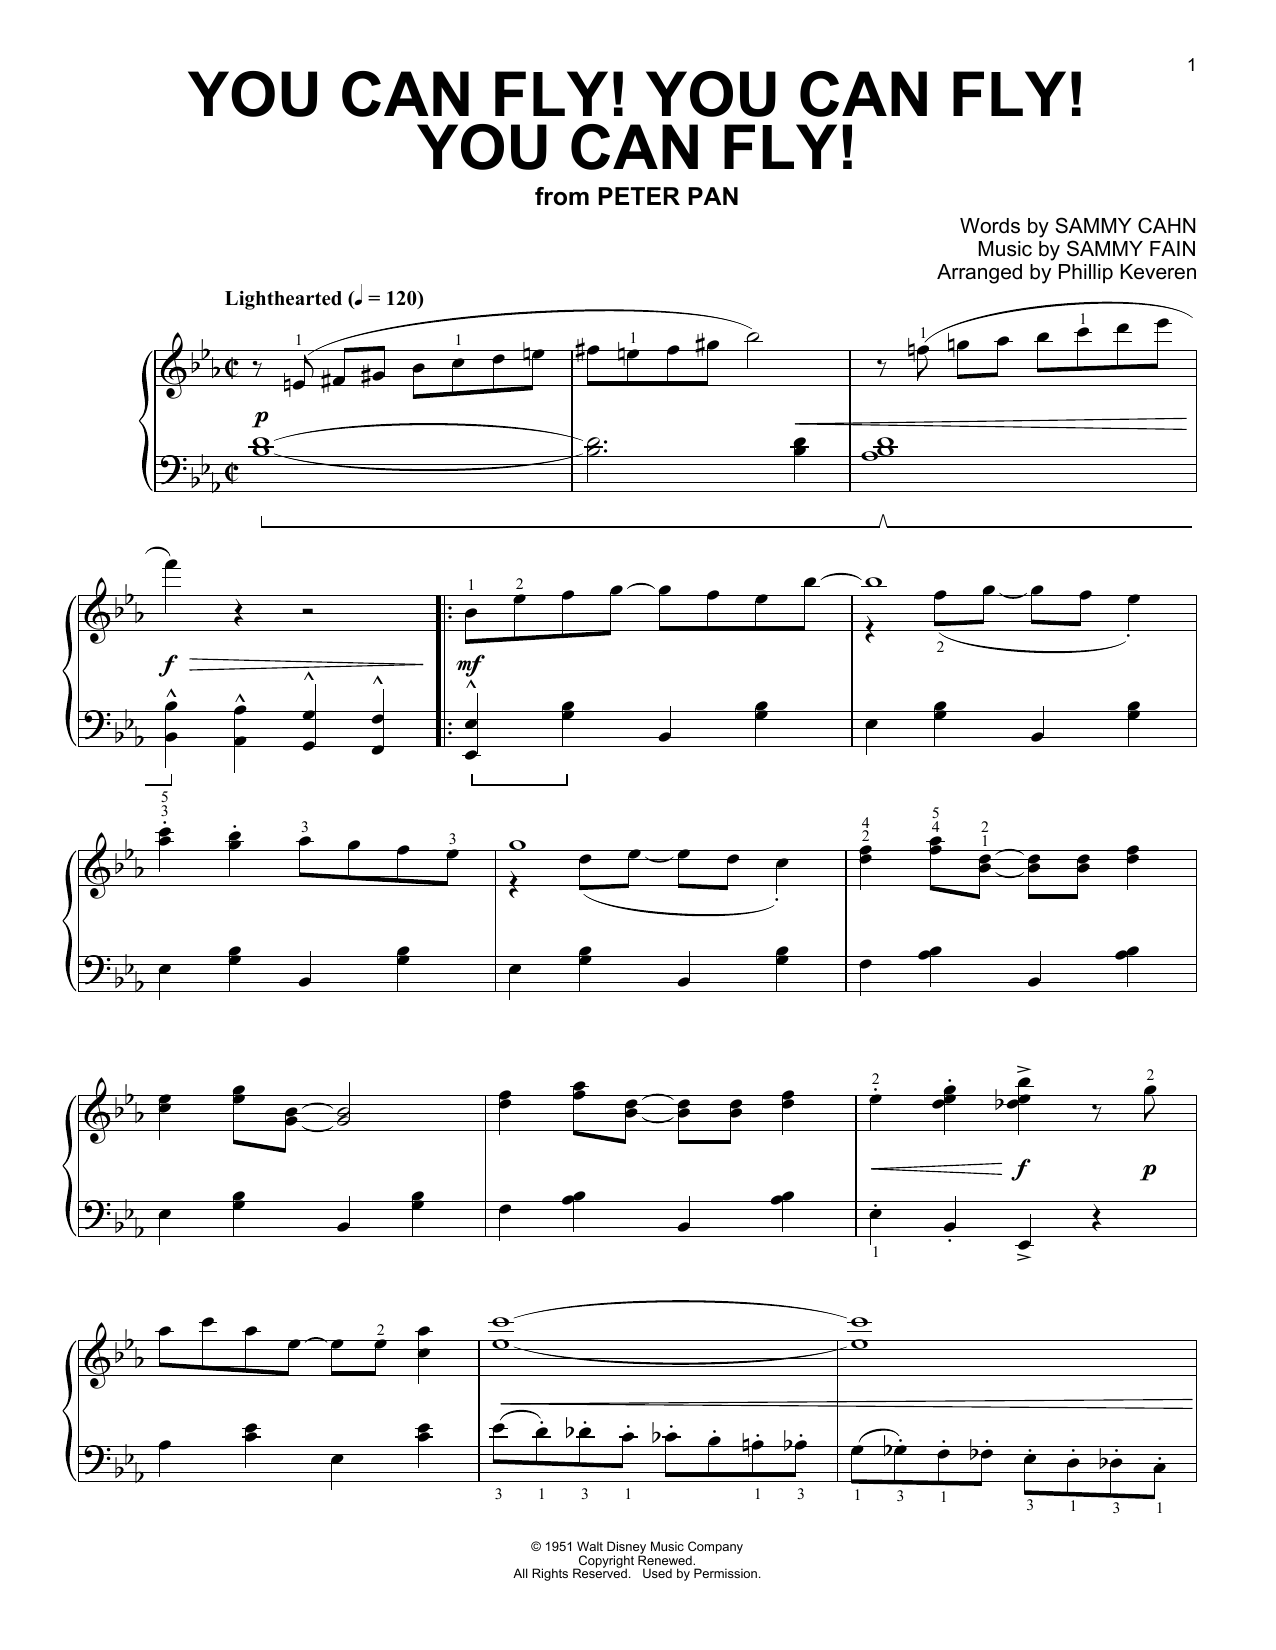 Download Sammy Fain You Can Fly! You Can Fly! You Can Fly! Sheet Music